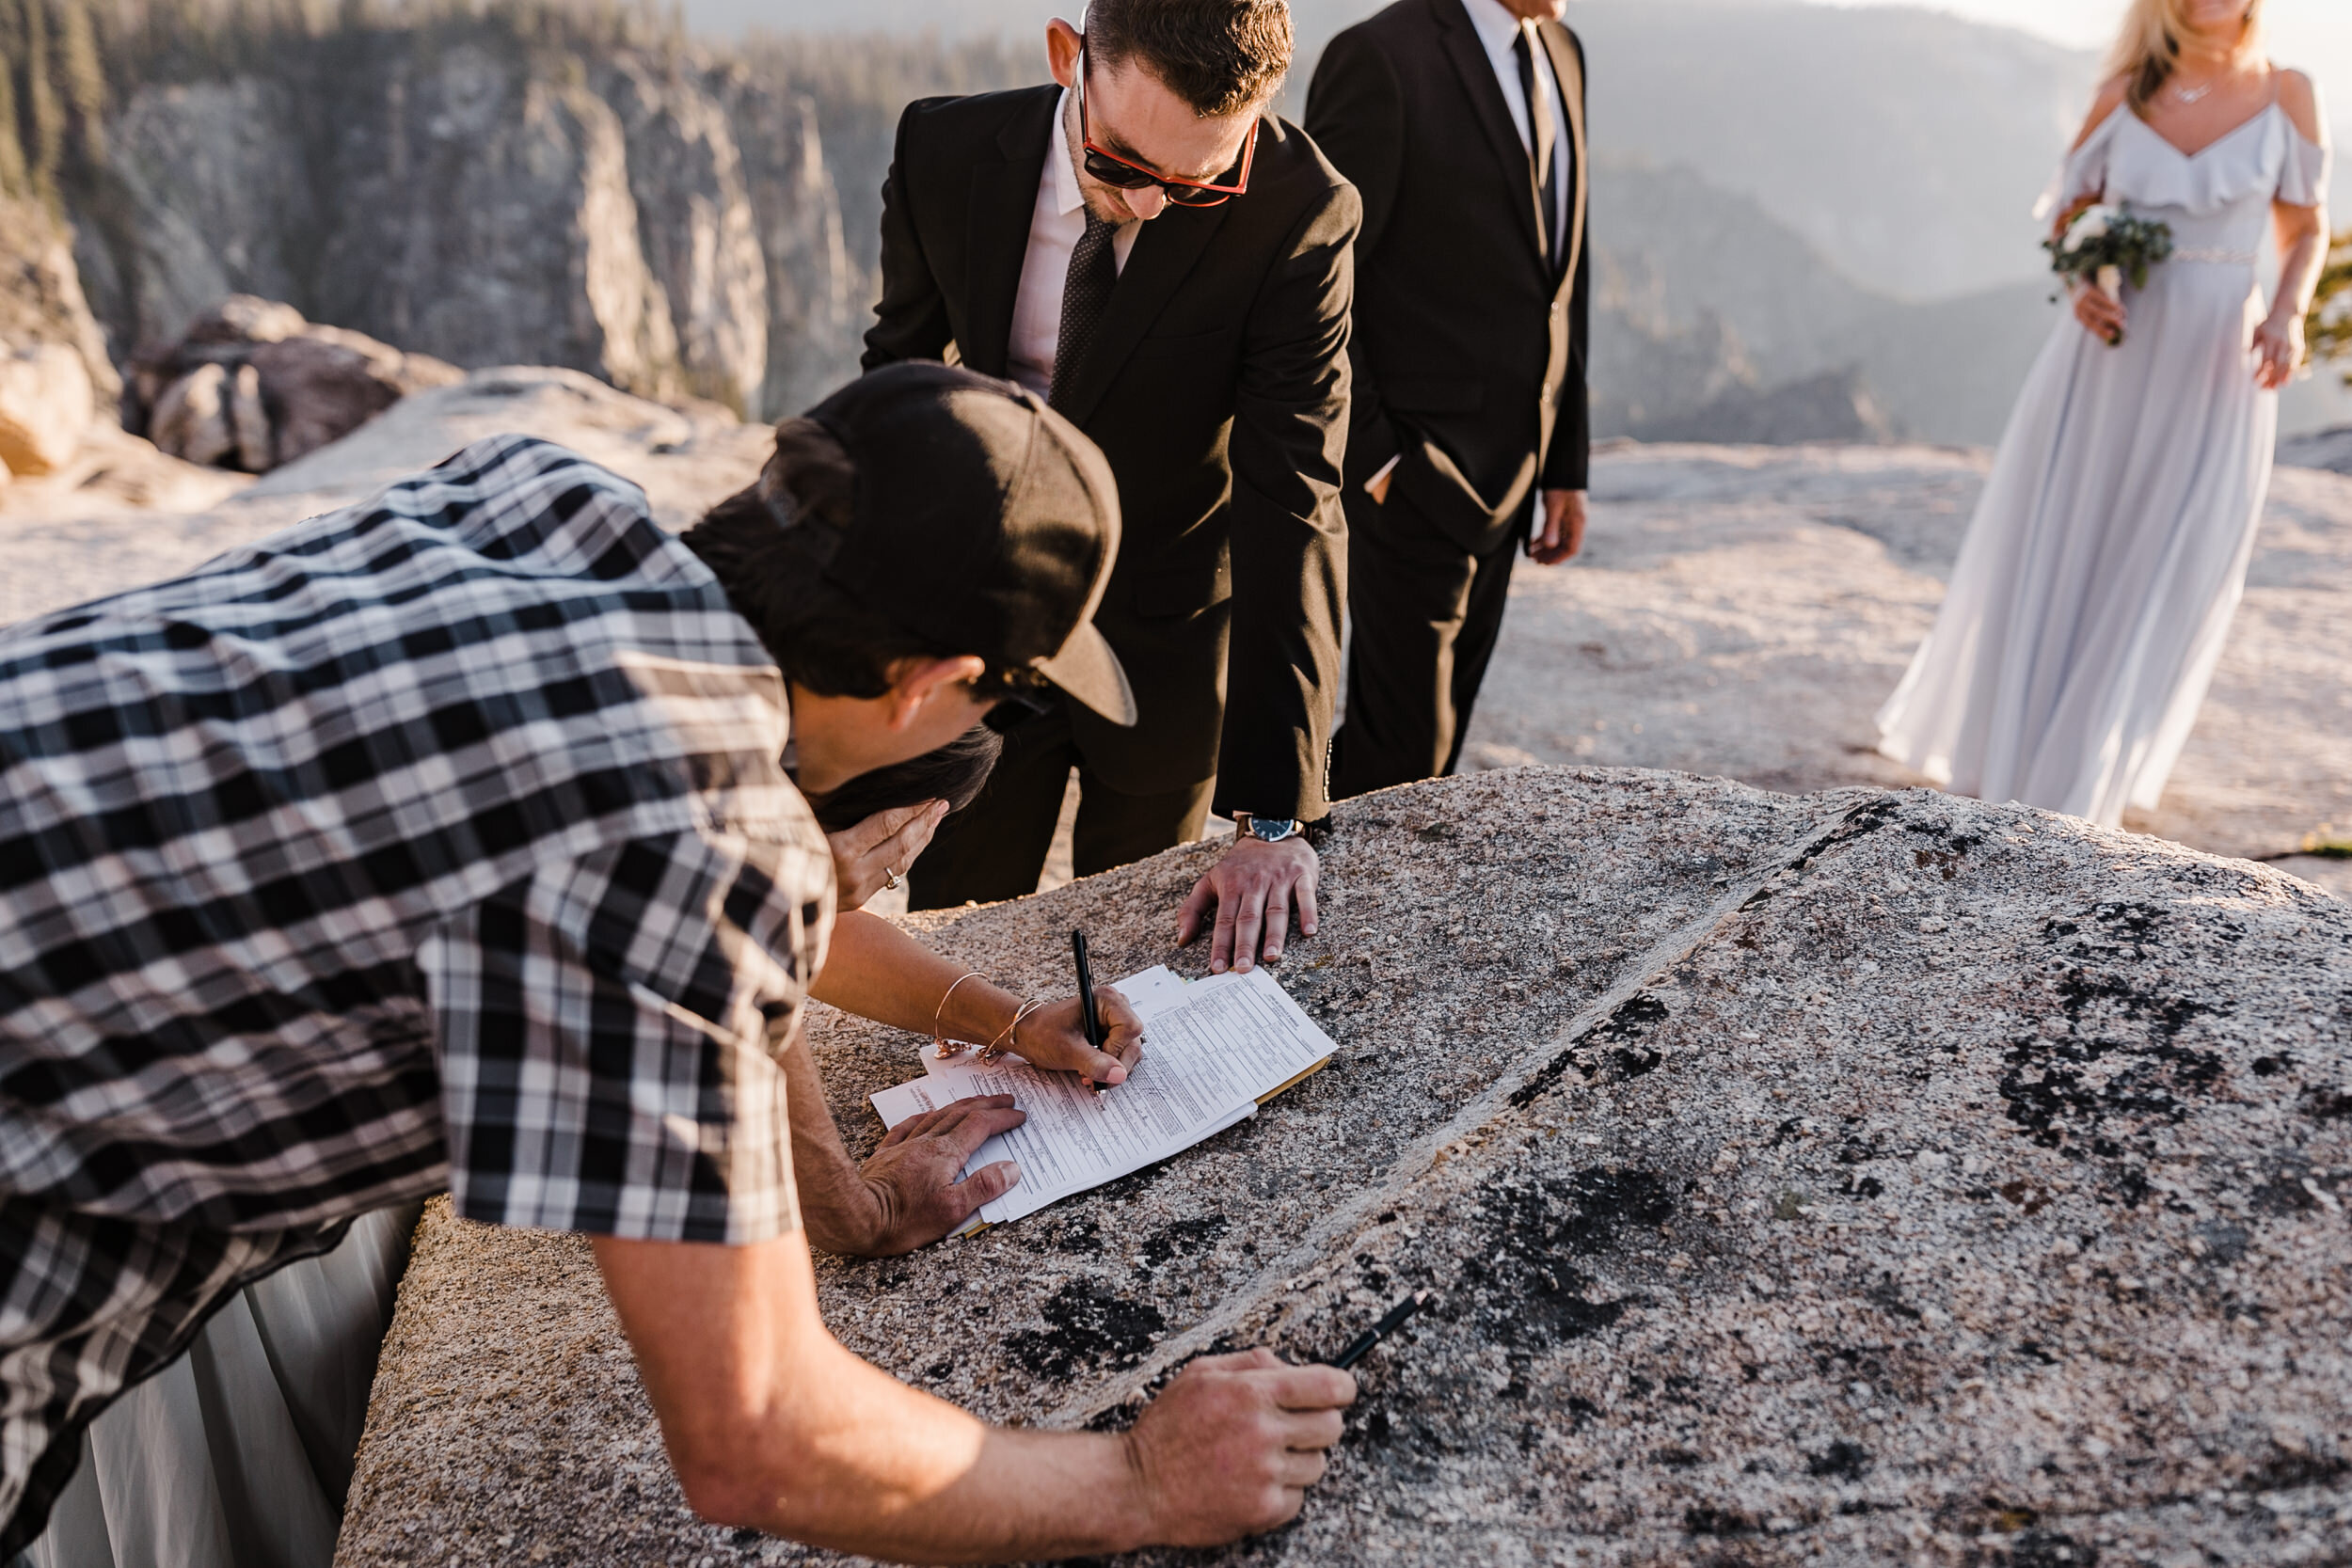 yosemite national park wedding ceremony on the edge of a cliff | the hearnes adventure photography